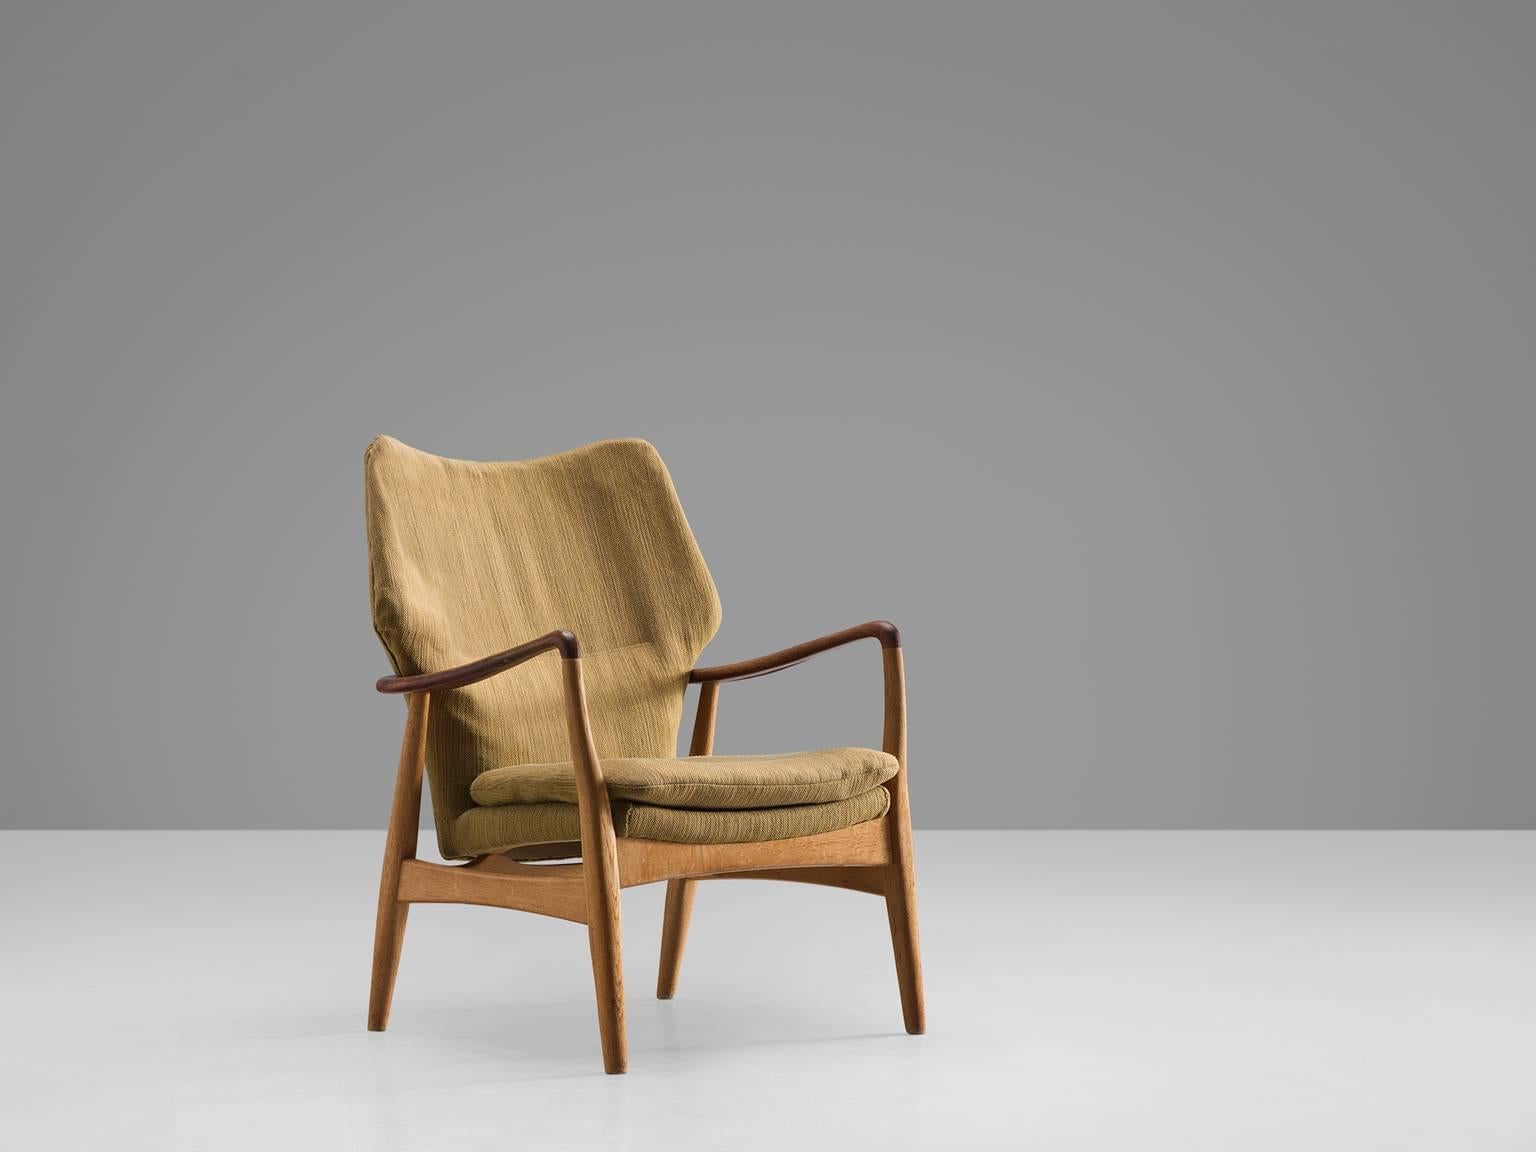 Aksel Bender Madsen for Bovenkamp, oak and teak and yellow to beige fabric, Denmark, 1950s.

This lady lounge chair by Madsen is executed by Bovenkamp. Madsen is known for his modest, Minimalist designs that are often executed in teak or oak. In